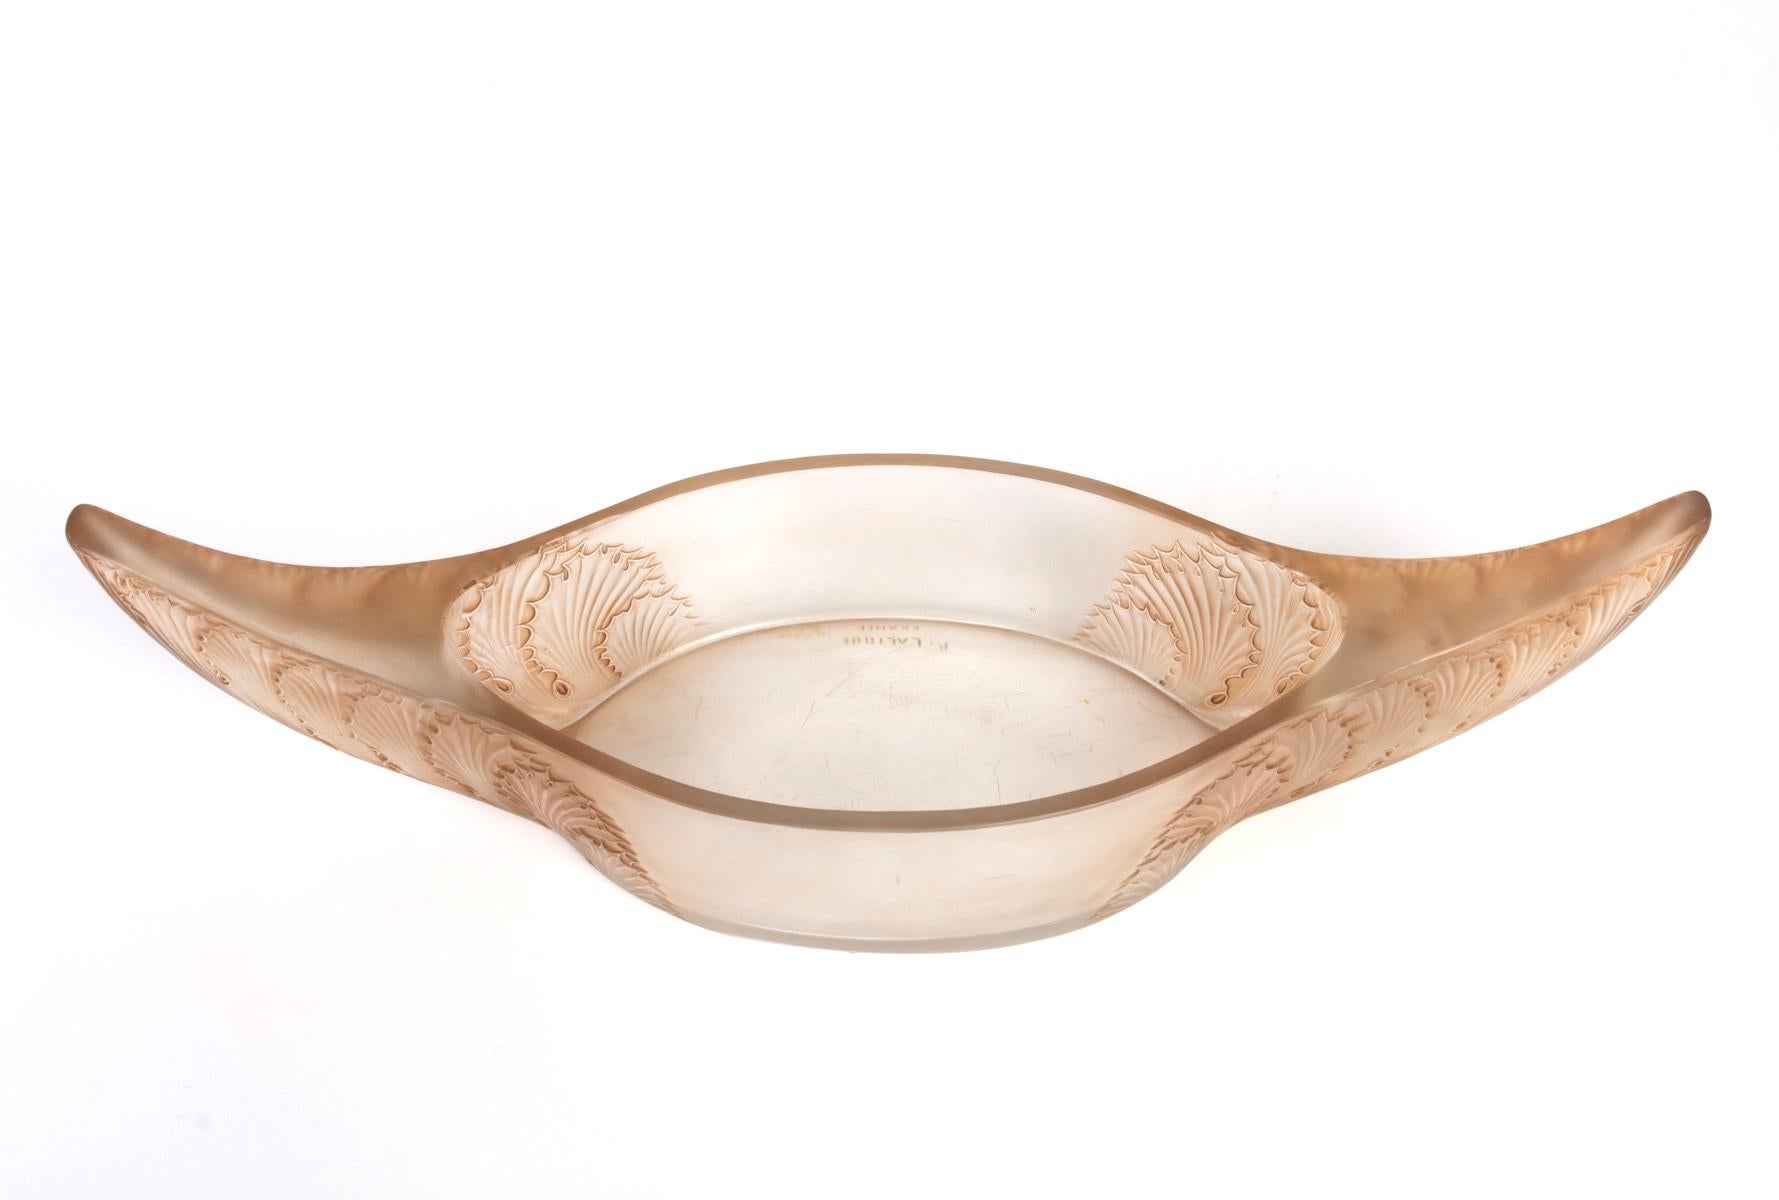 French 1927 René Lalique Acanthes Jardinière Bowl Frosted Glass with Sepia Patina